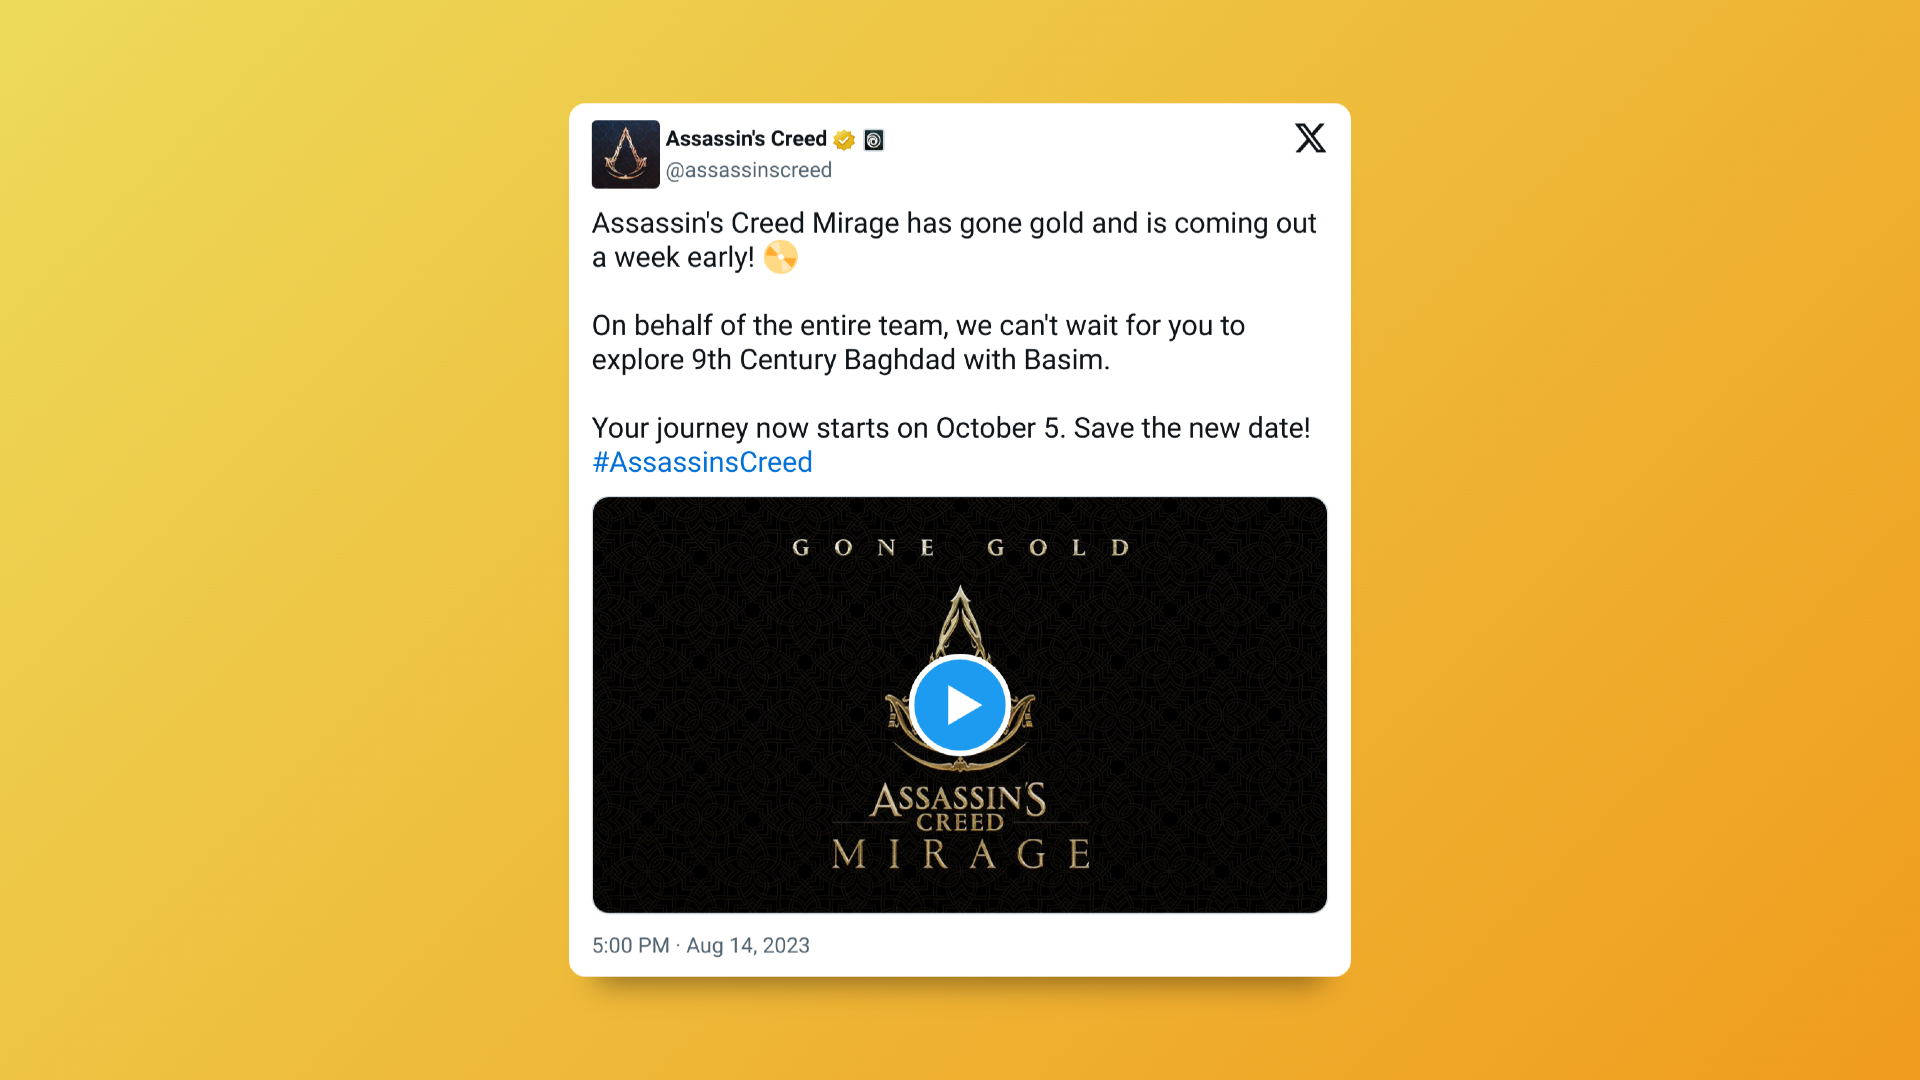 Assassin's Creed Mirage official announcment on social media regarding its new release date